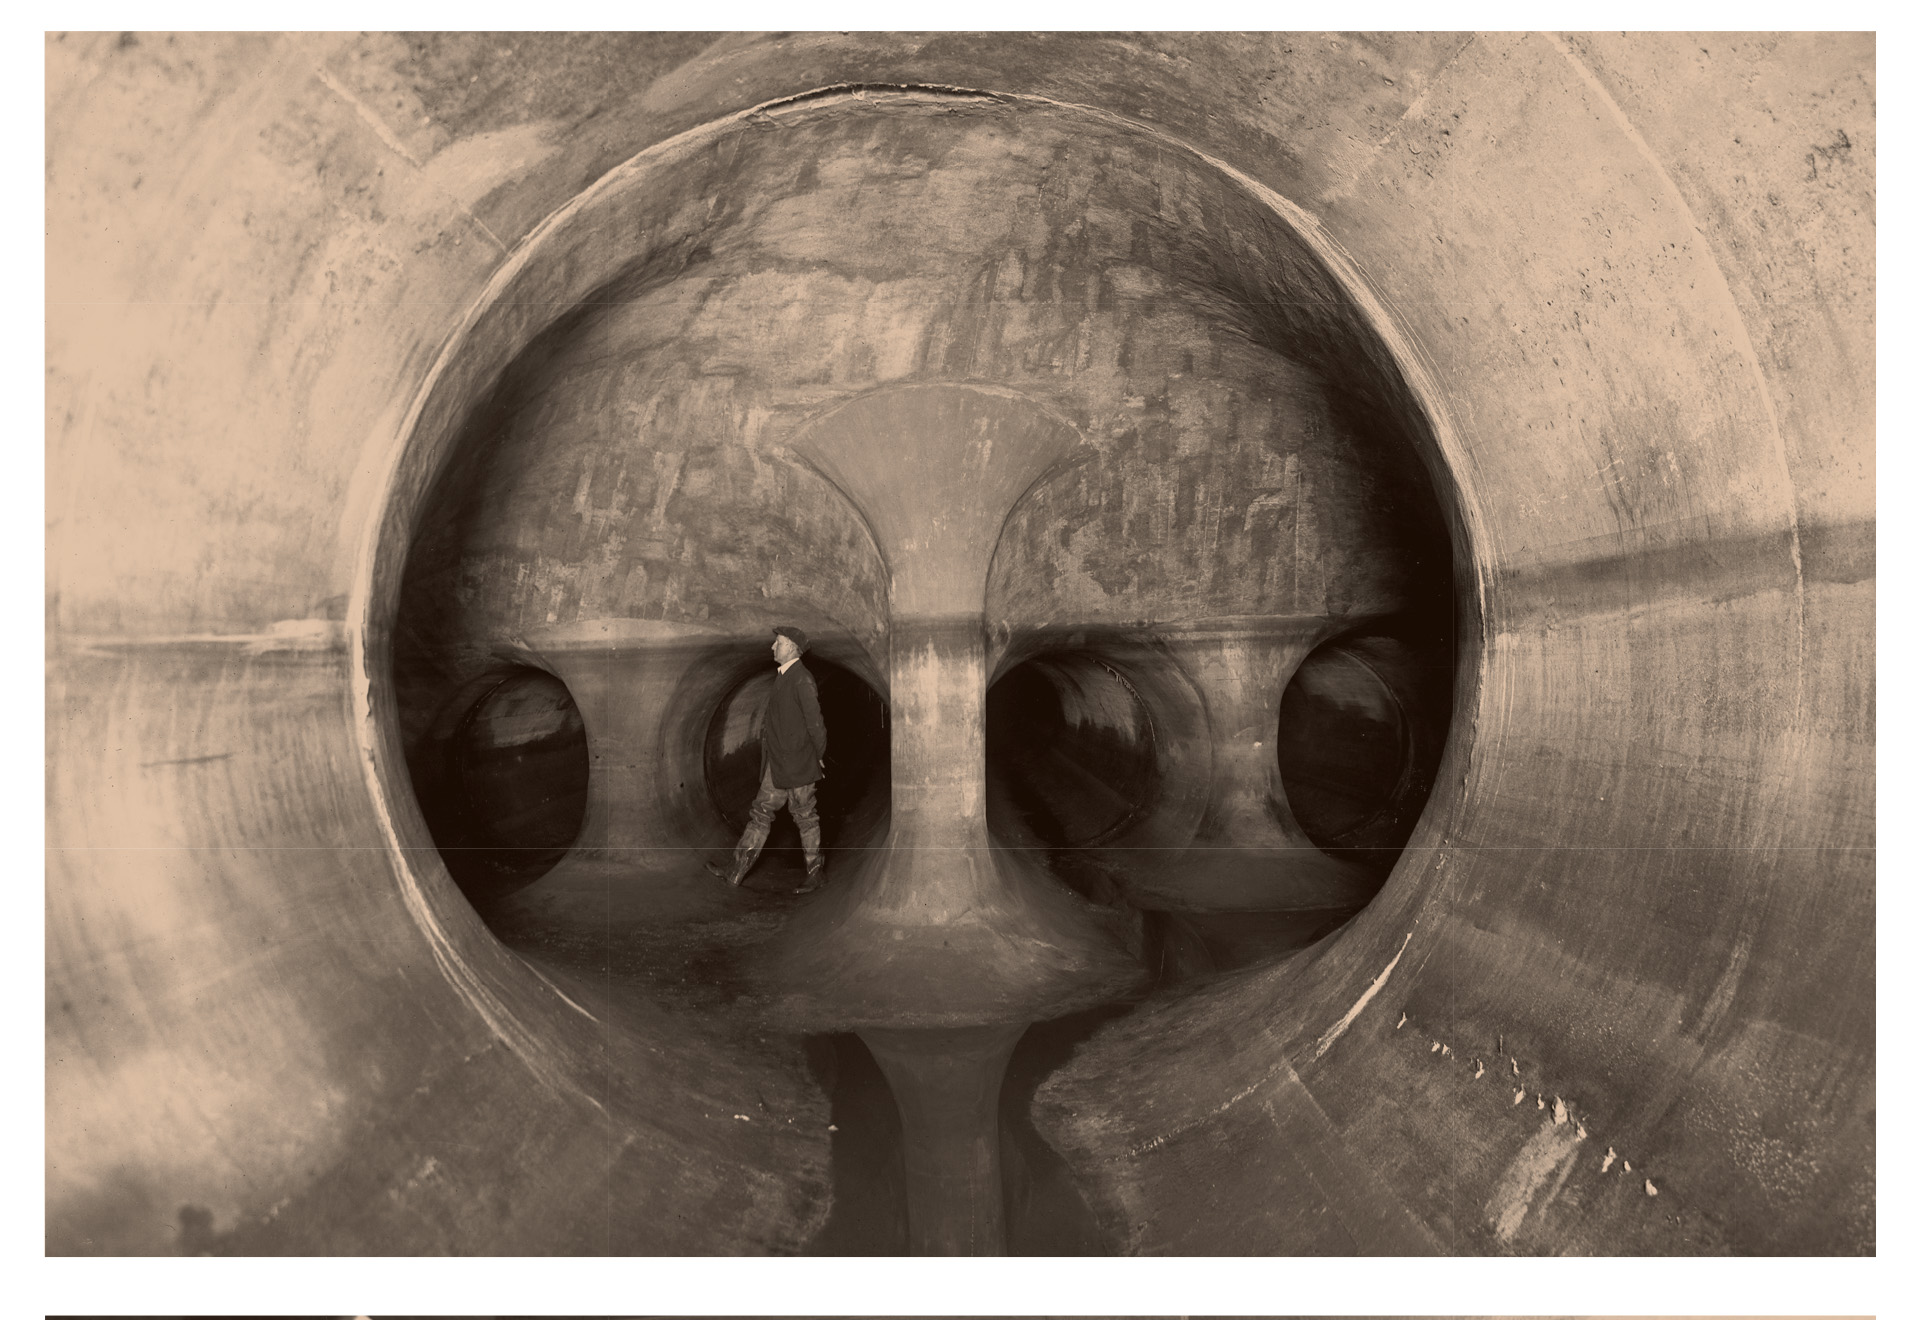 Construction of interceptor sewers in the 1920s—New Jersey, U.S. The main interceptor is 22 miles long and connects to 18 miles of branch sewers. (Passaic Valley Sewerage Commission)